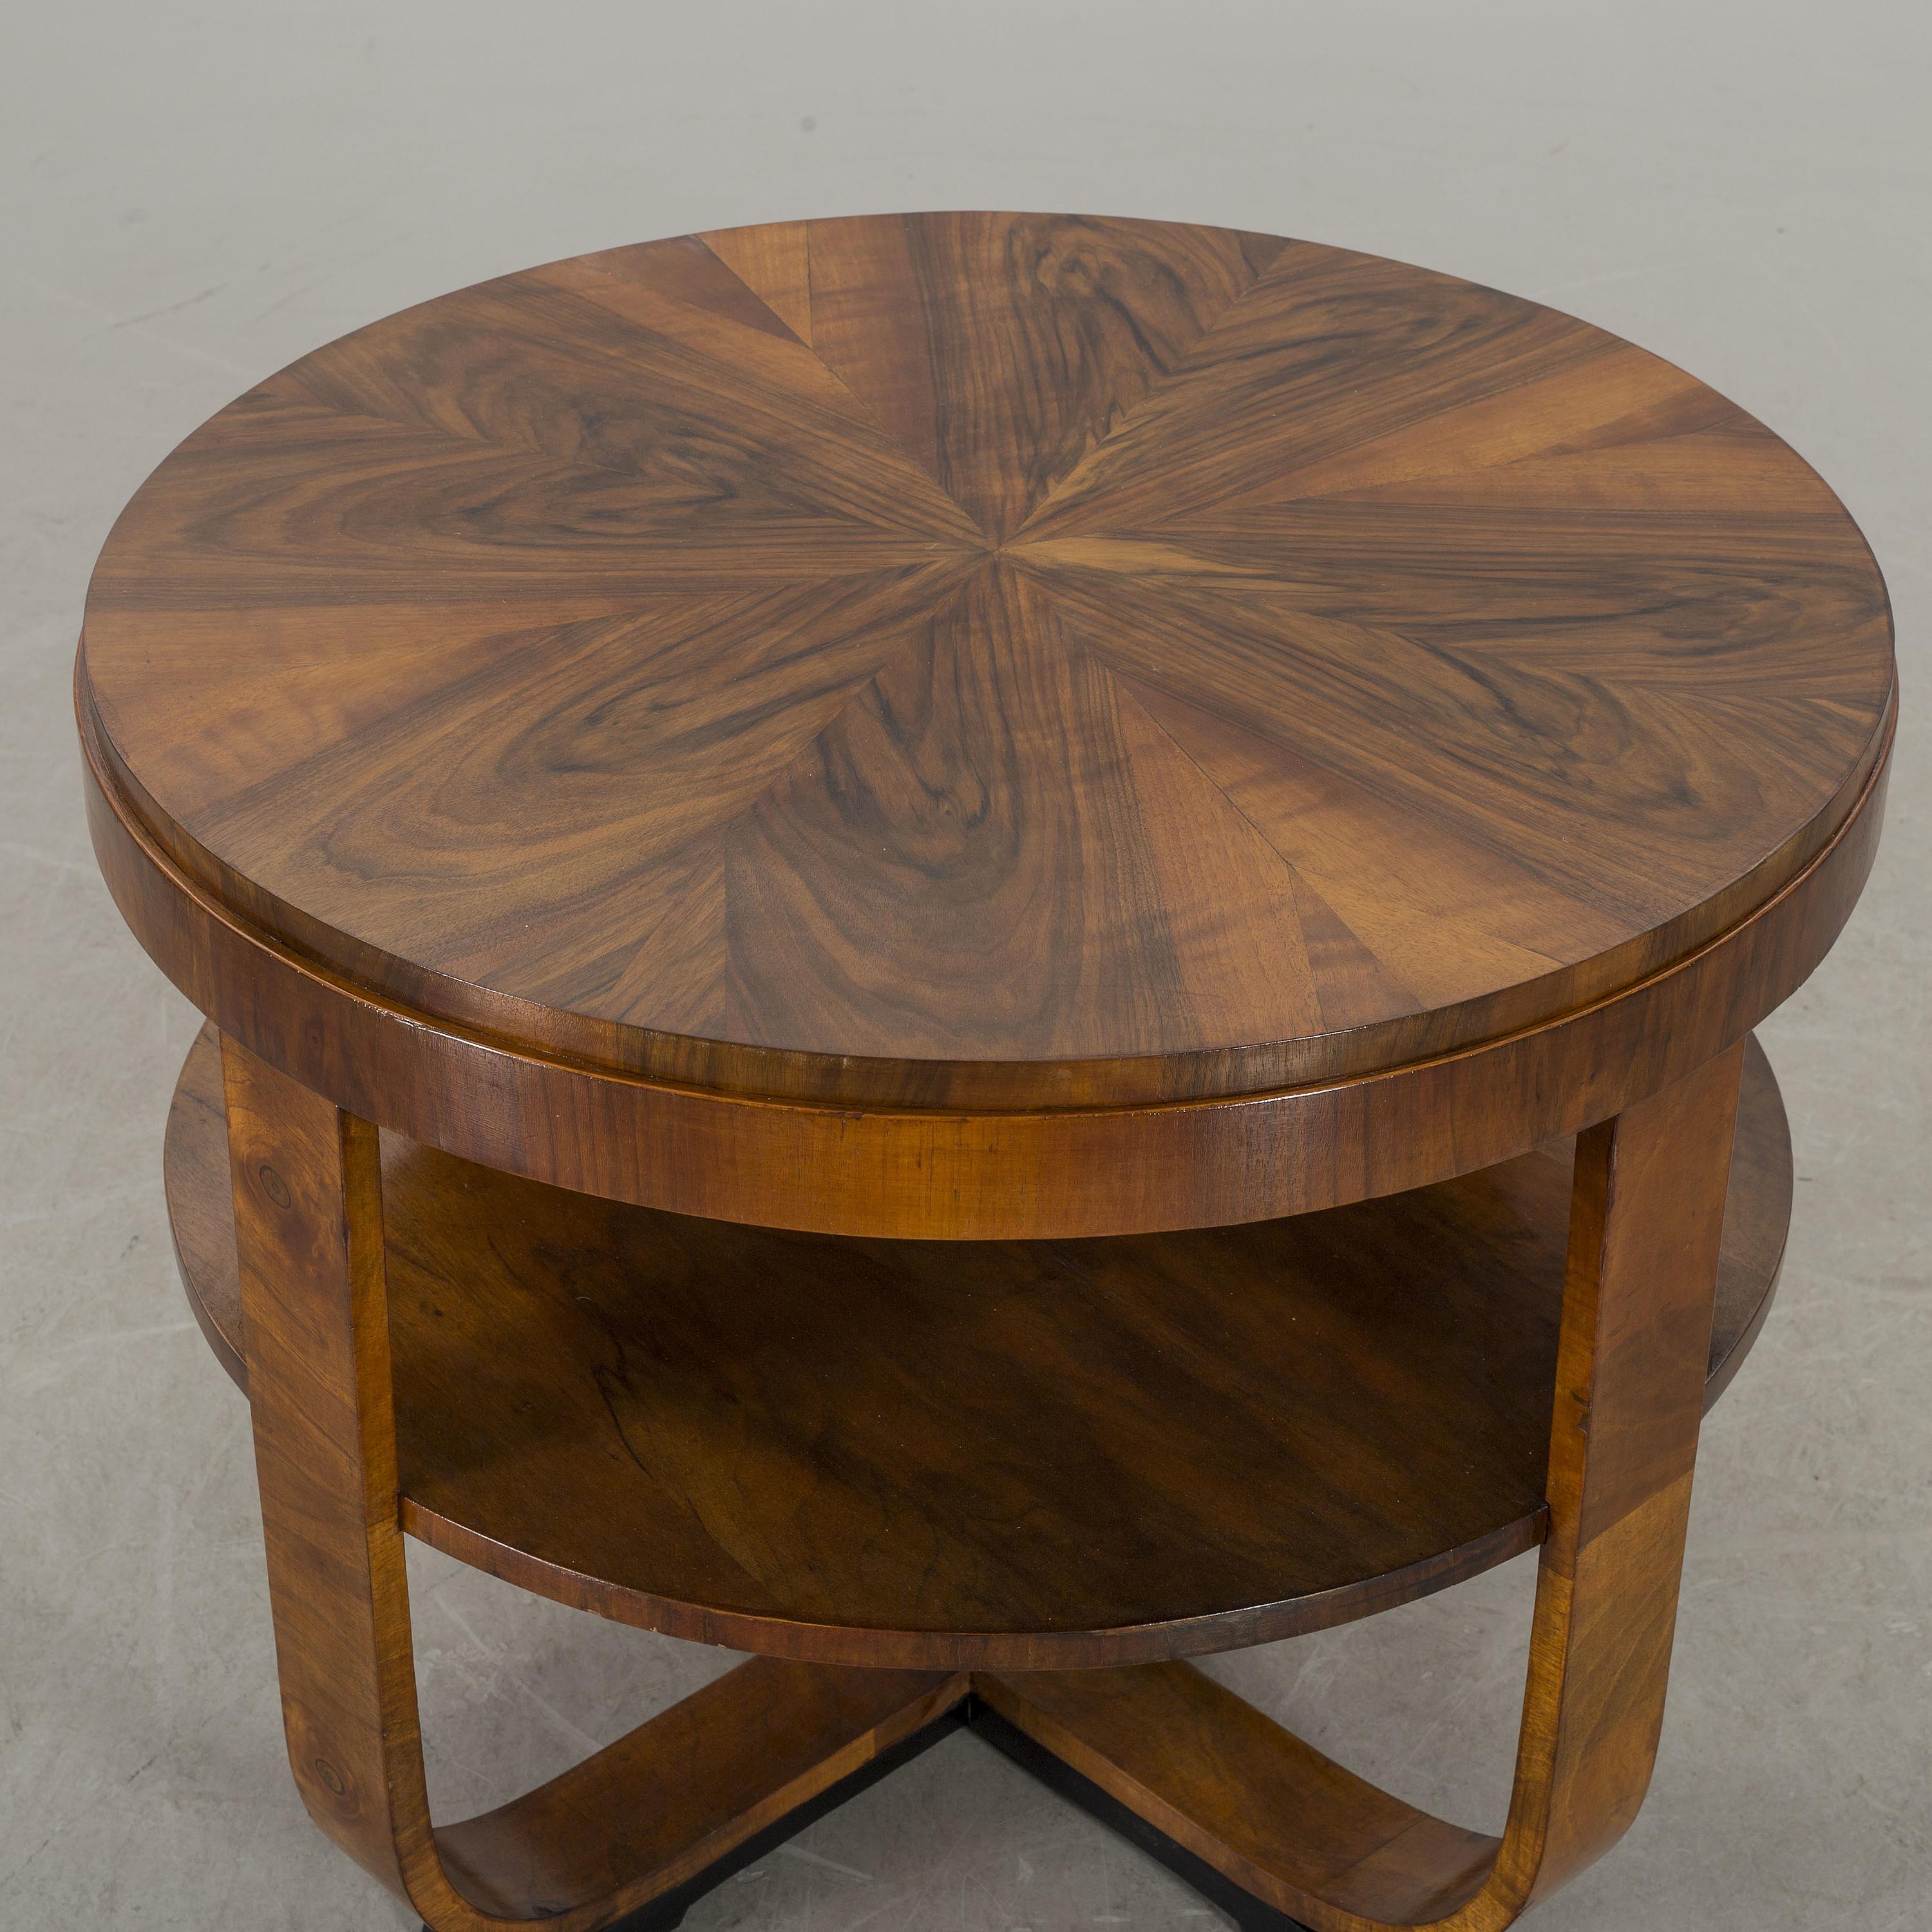 Beautiful Art Deco style side table made of walnut with ebonized feet.  A second table (in Europe now but being shipped to the US) will be available if pair needed.  